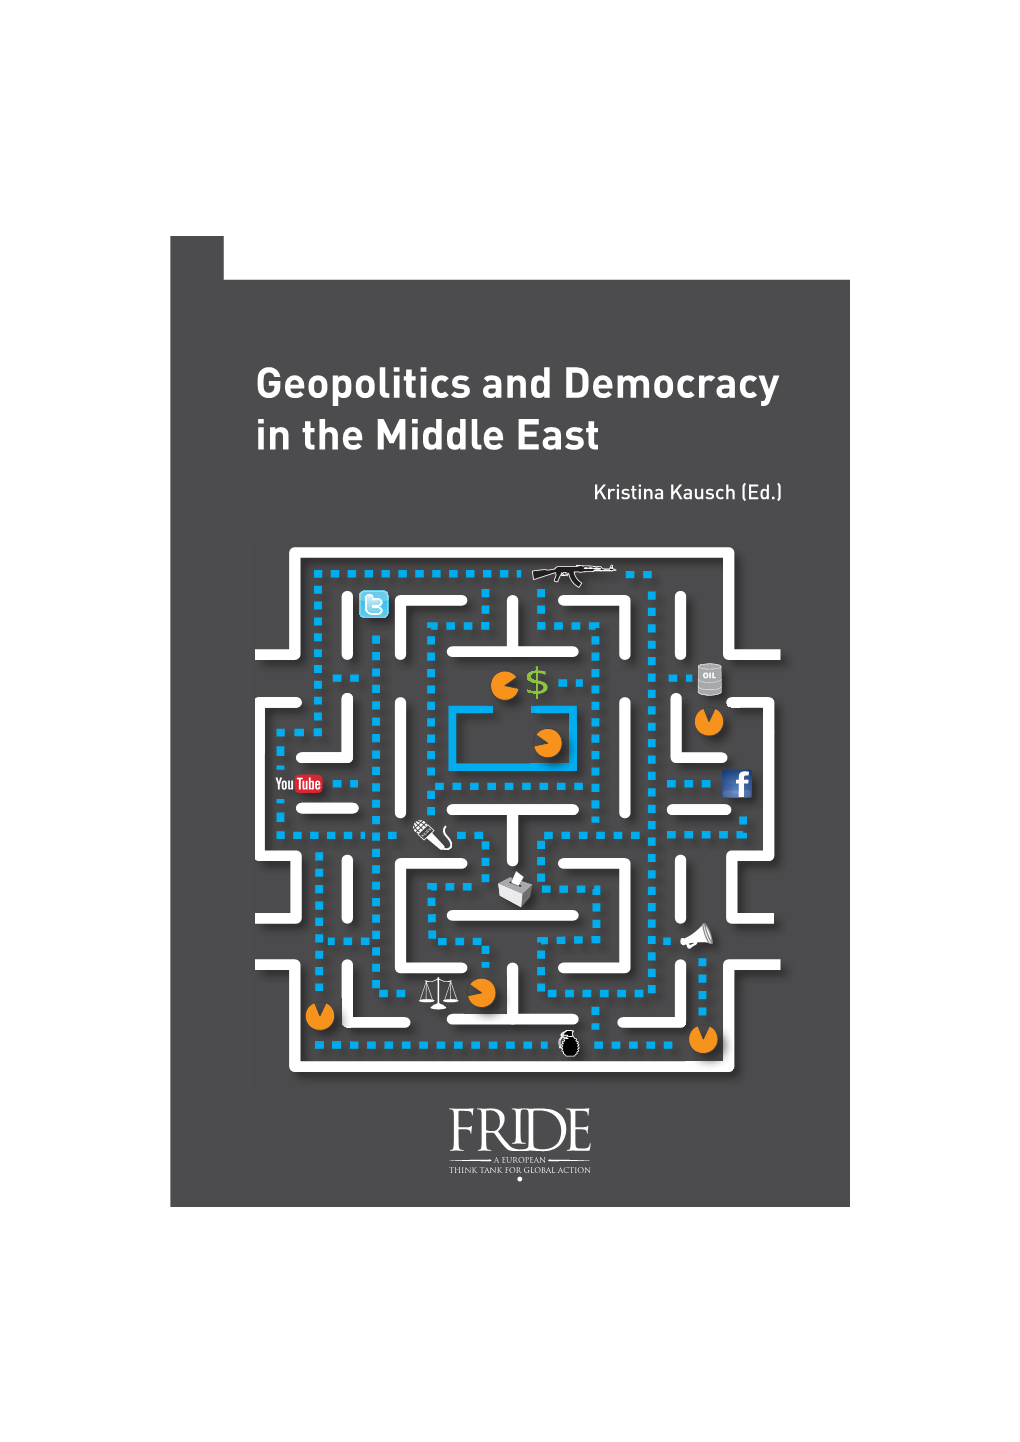 Geopolitics and Democracy in the Middle East